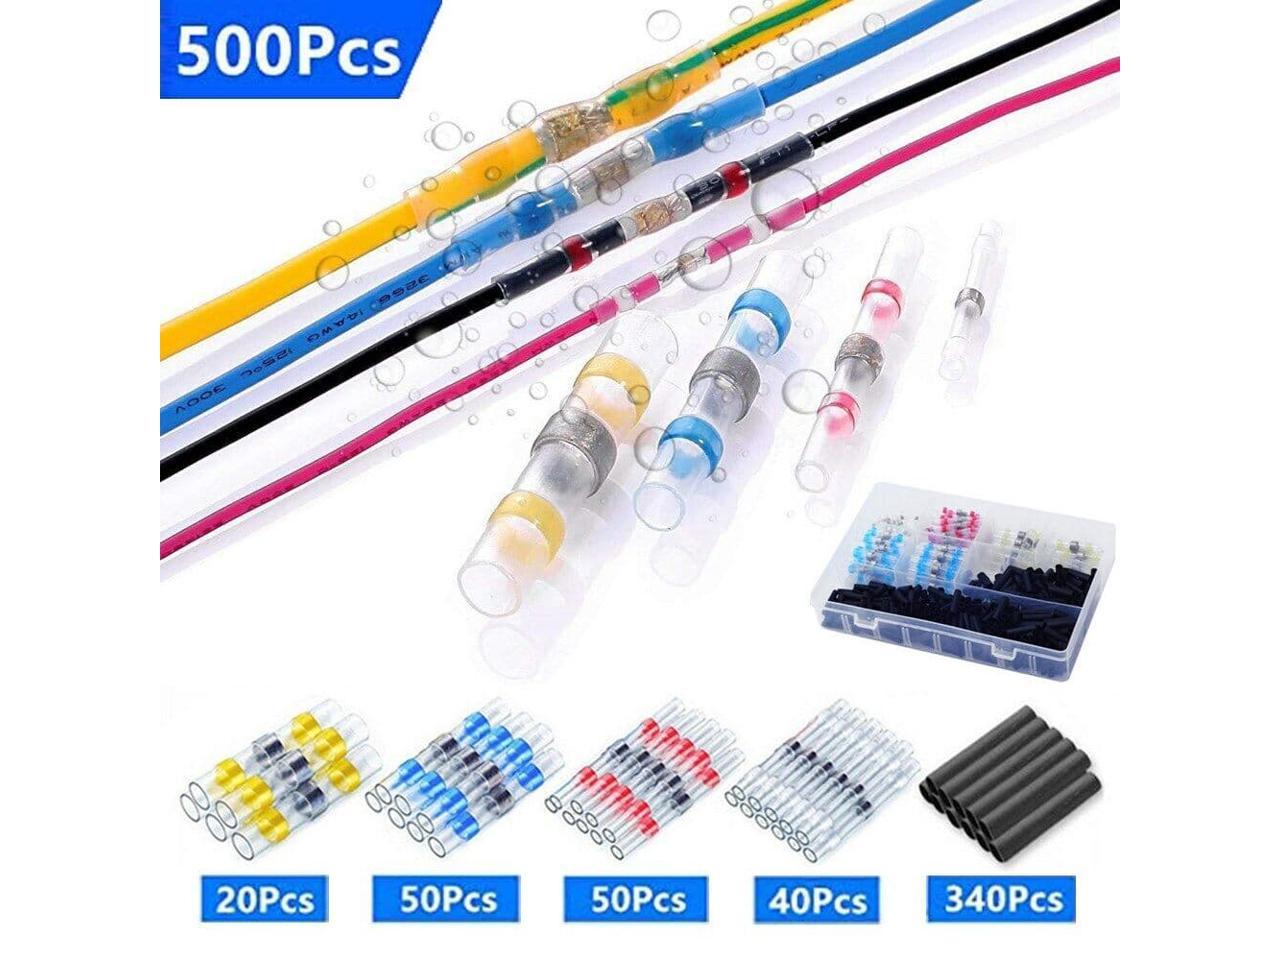 50Pcs White Waterproof Solder Sleeves Heat Shrink Wire Butt Terminals With Box